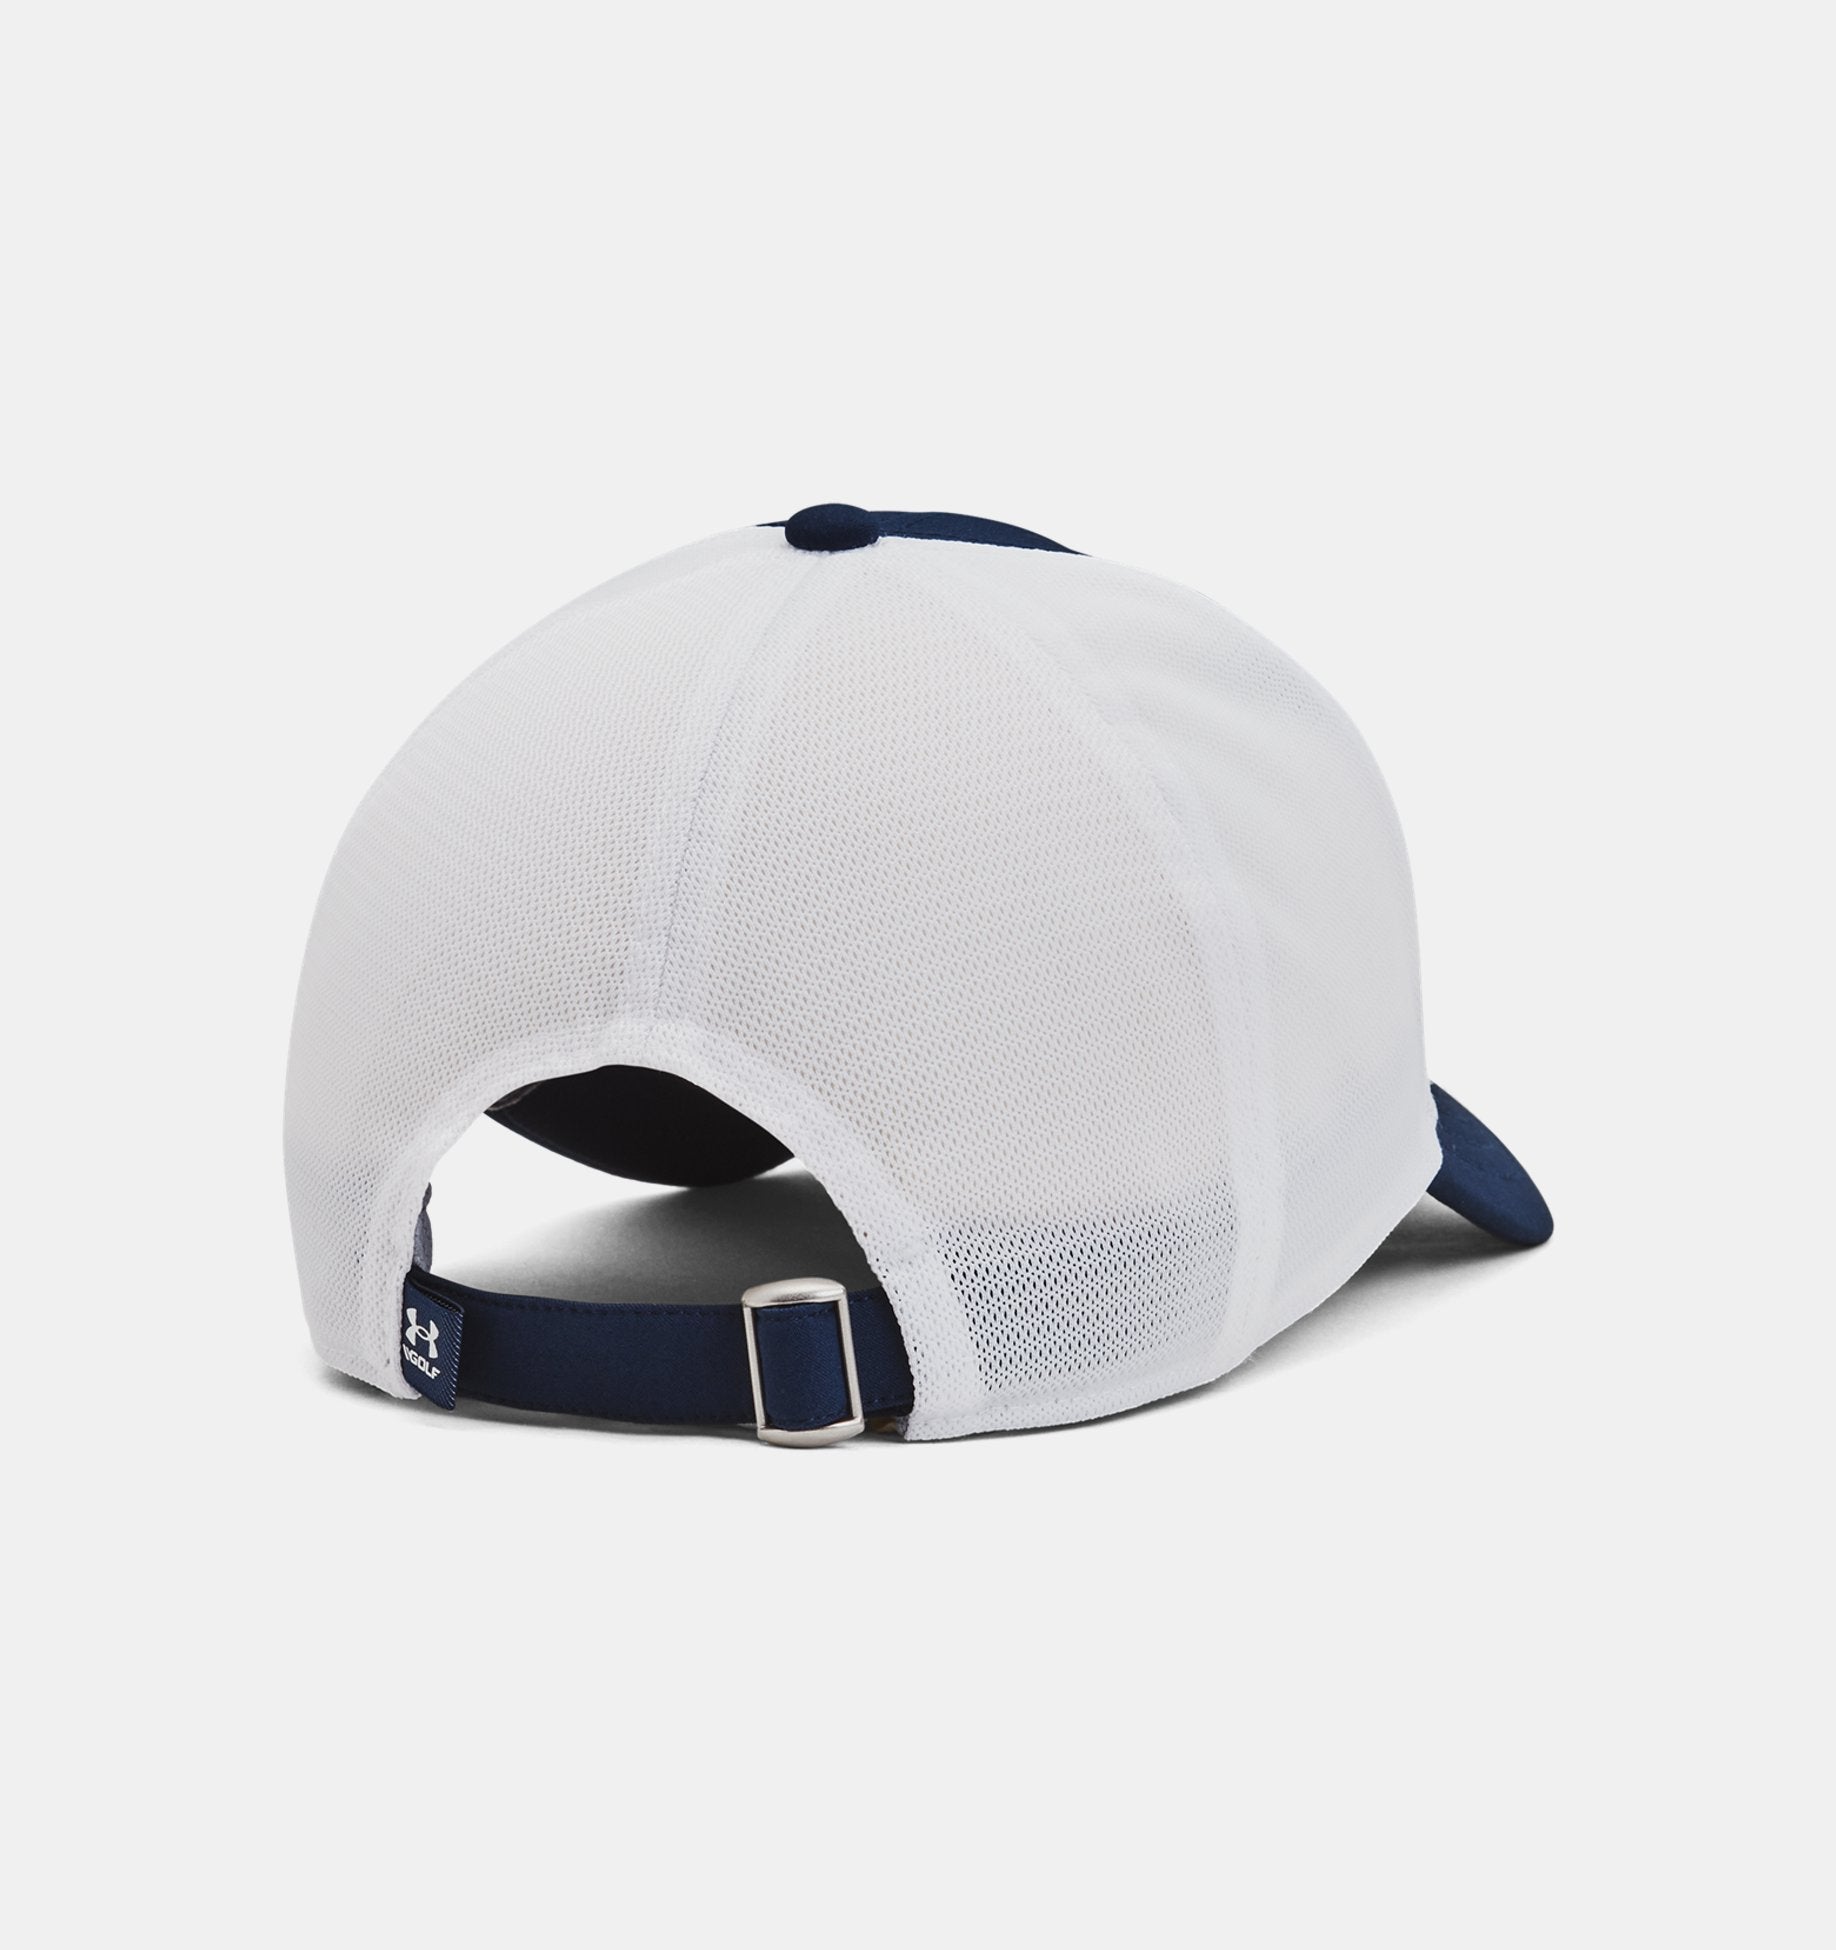 Stay cool under pressure with the Under Armour Mesh Driver Cap